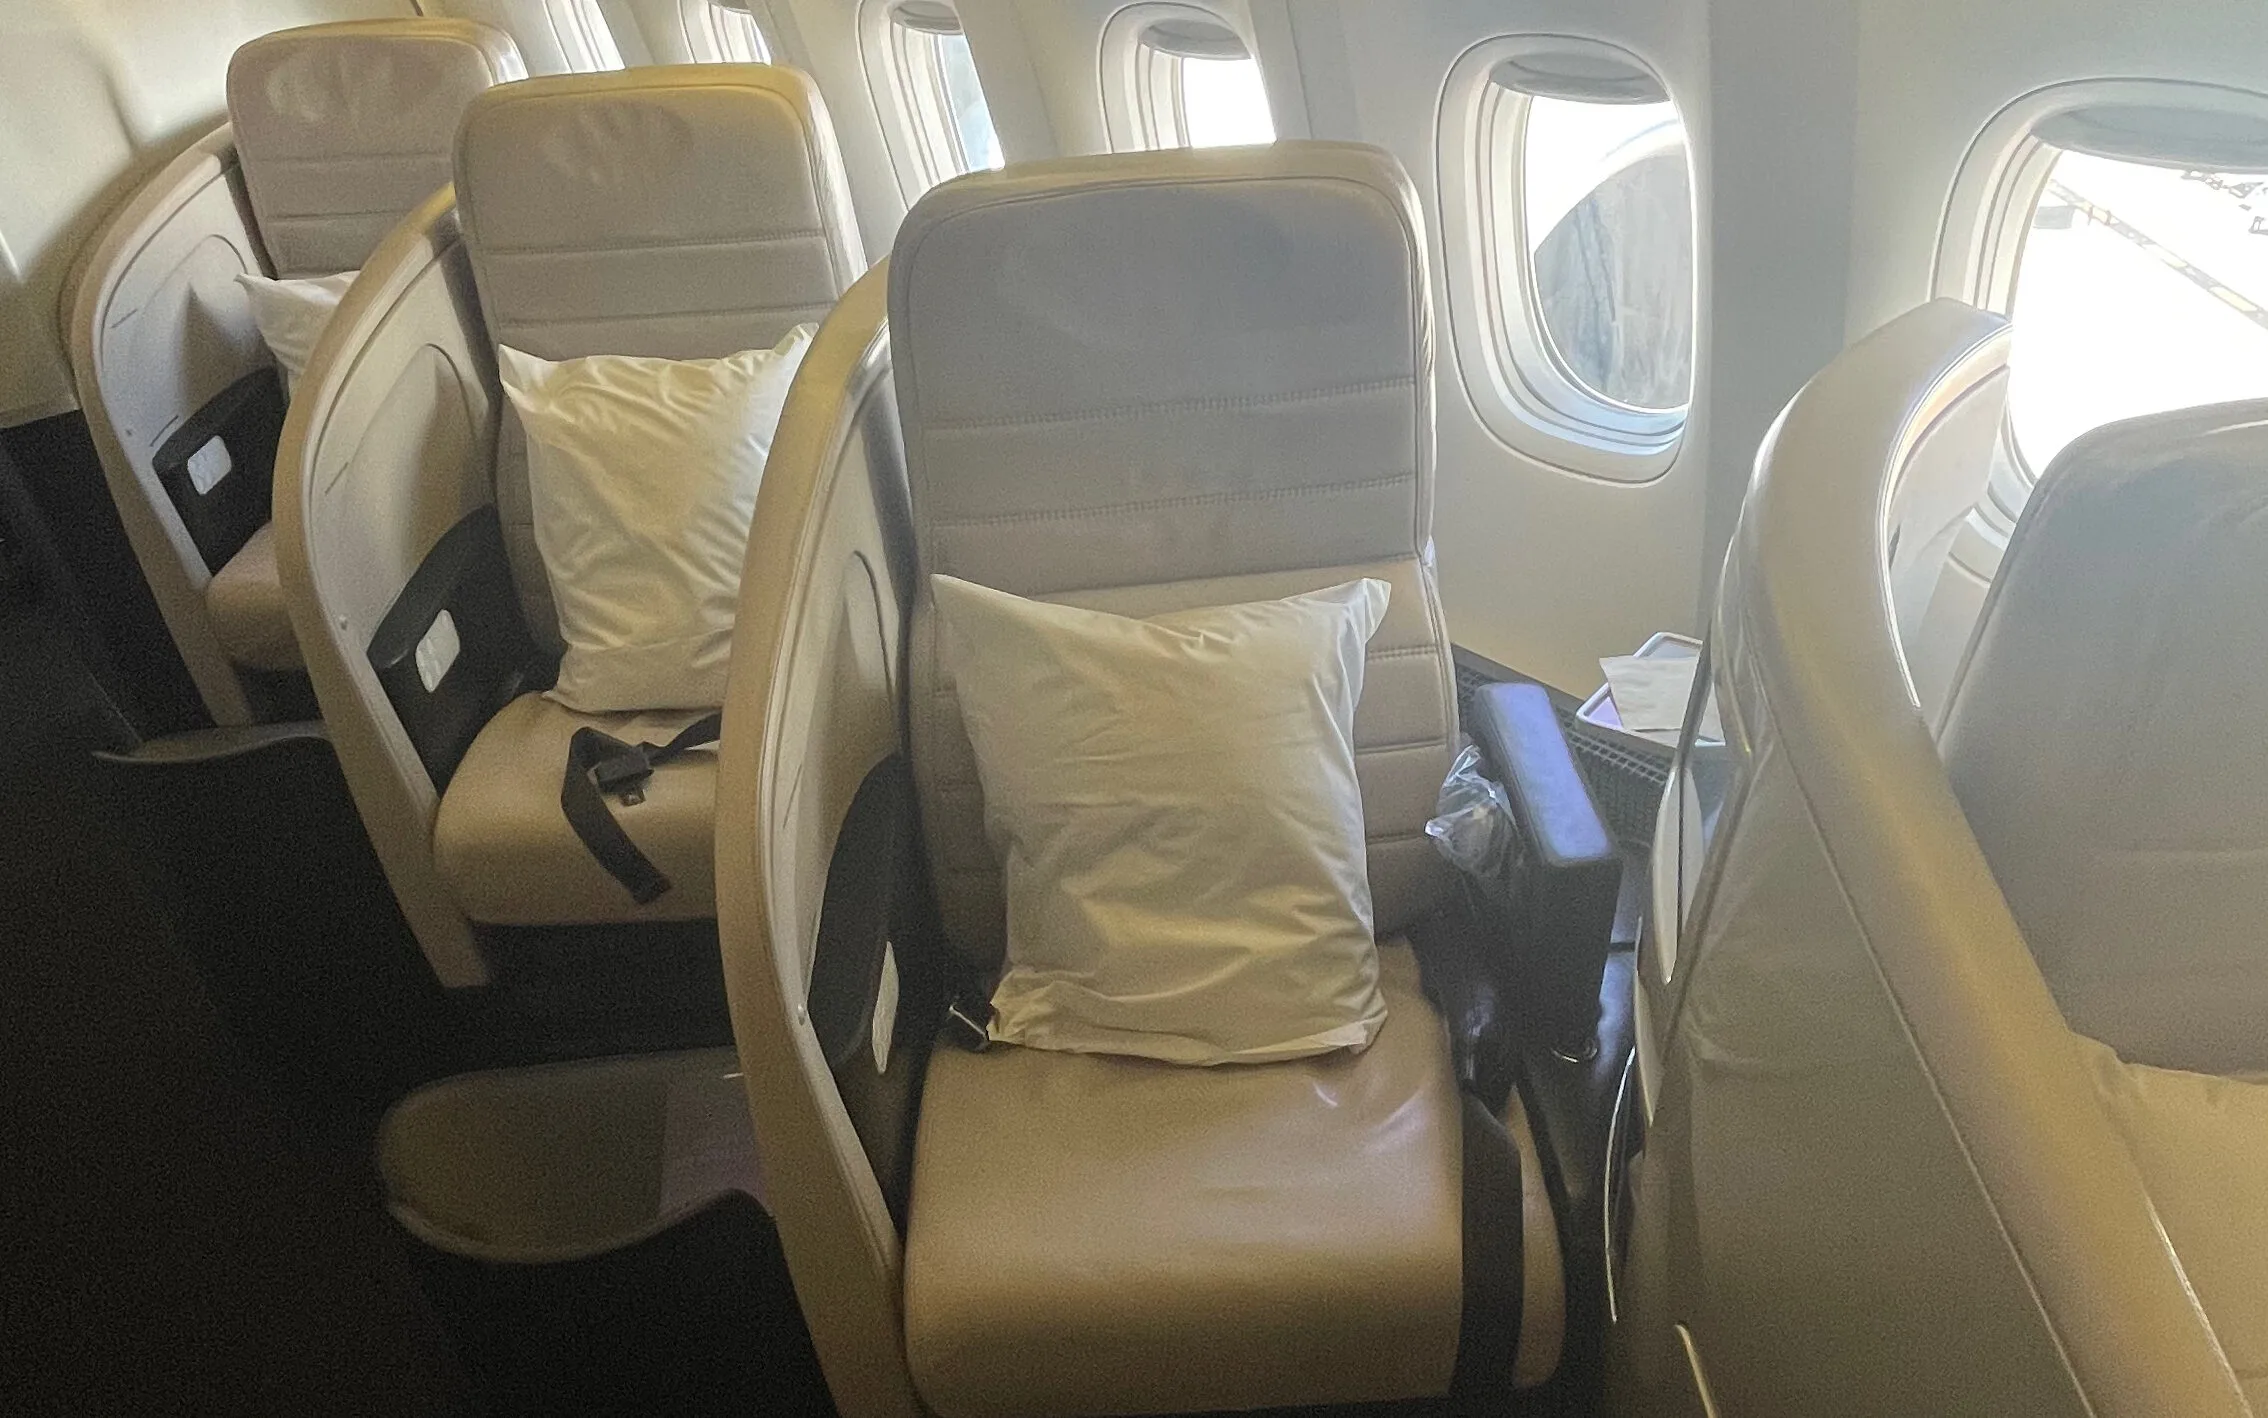 Air New Zealand Business Premier Seat on the 777-300 Aircraft